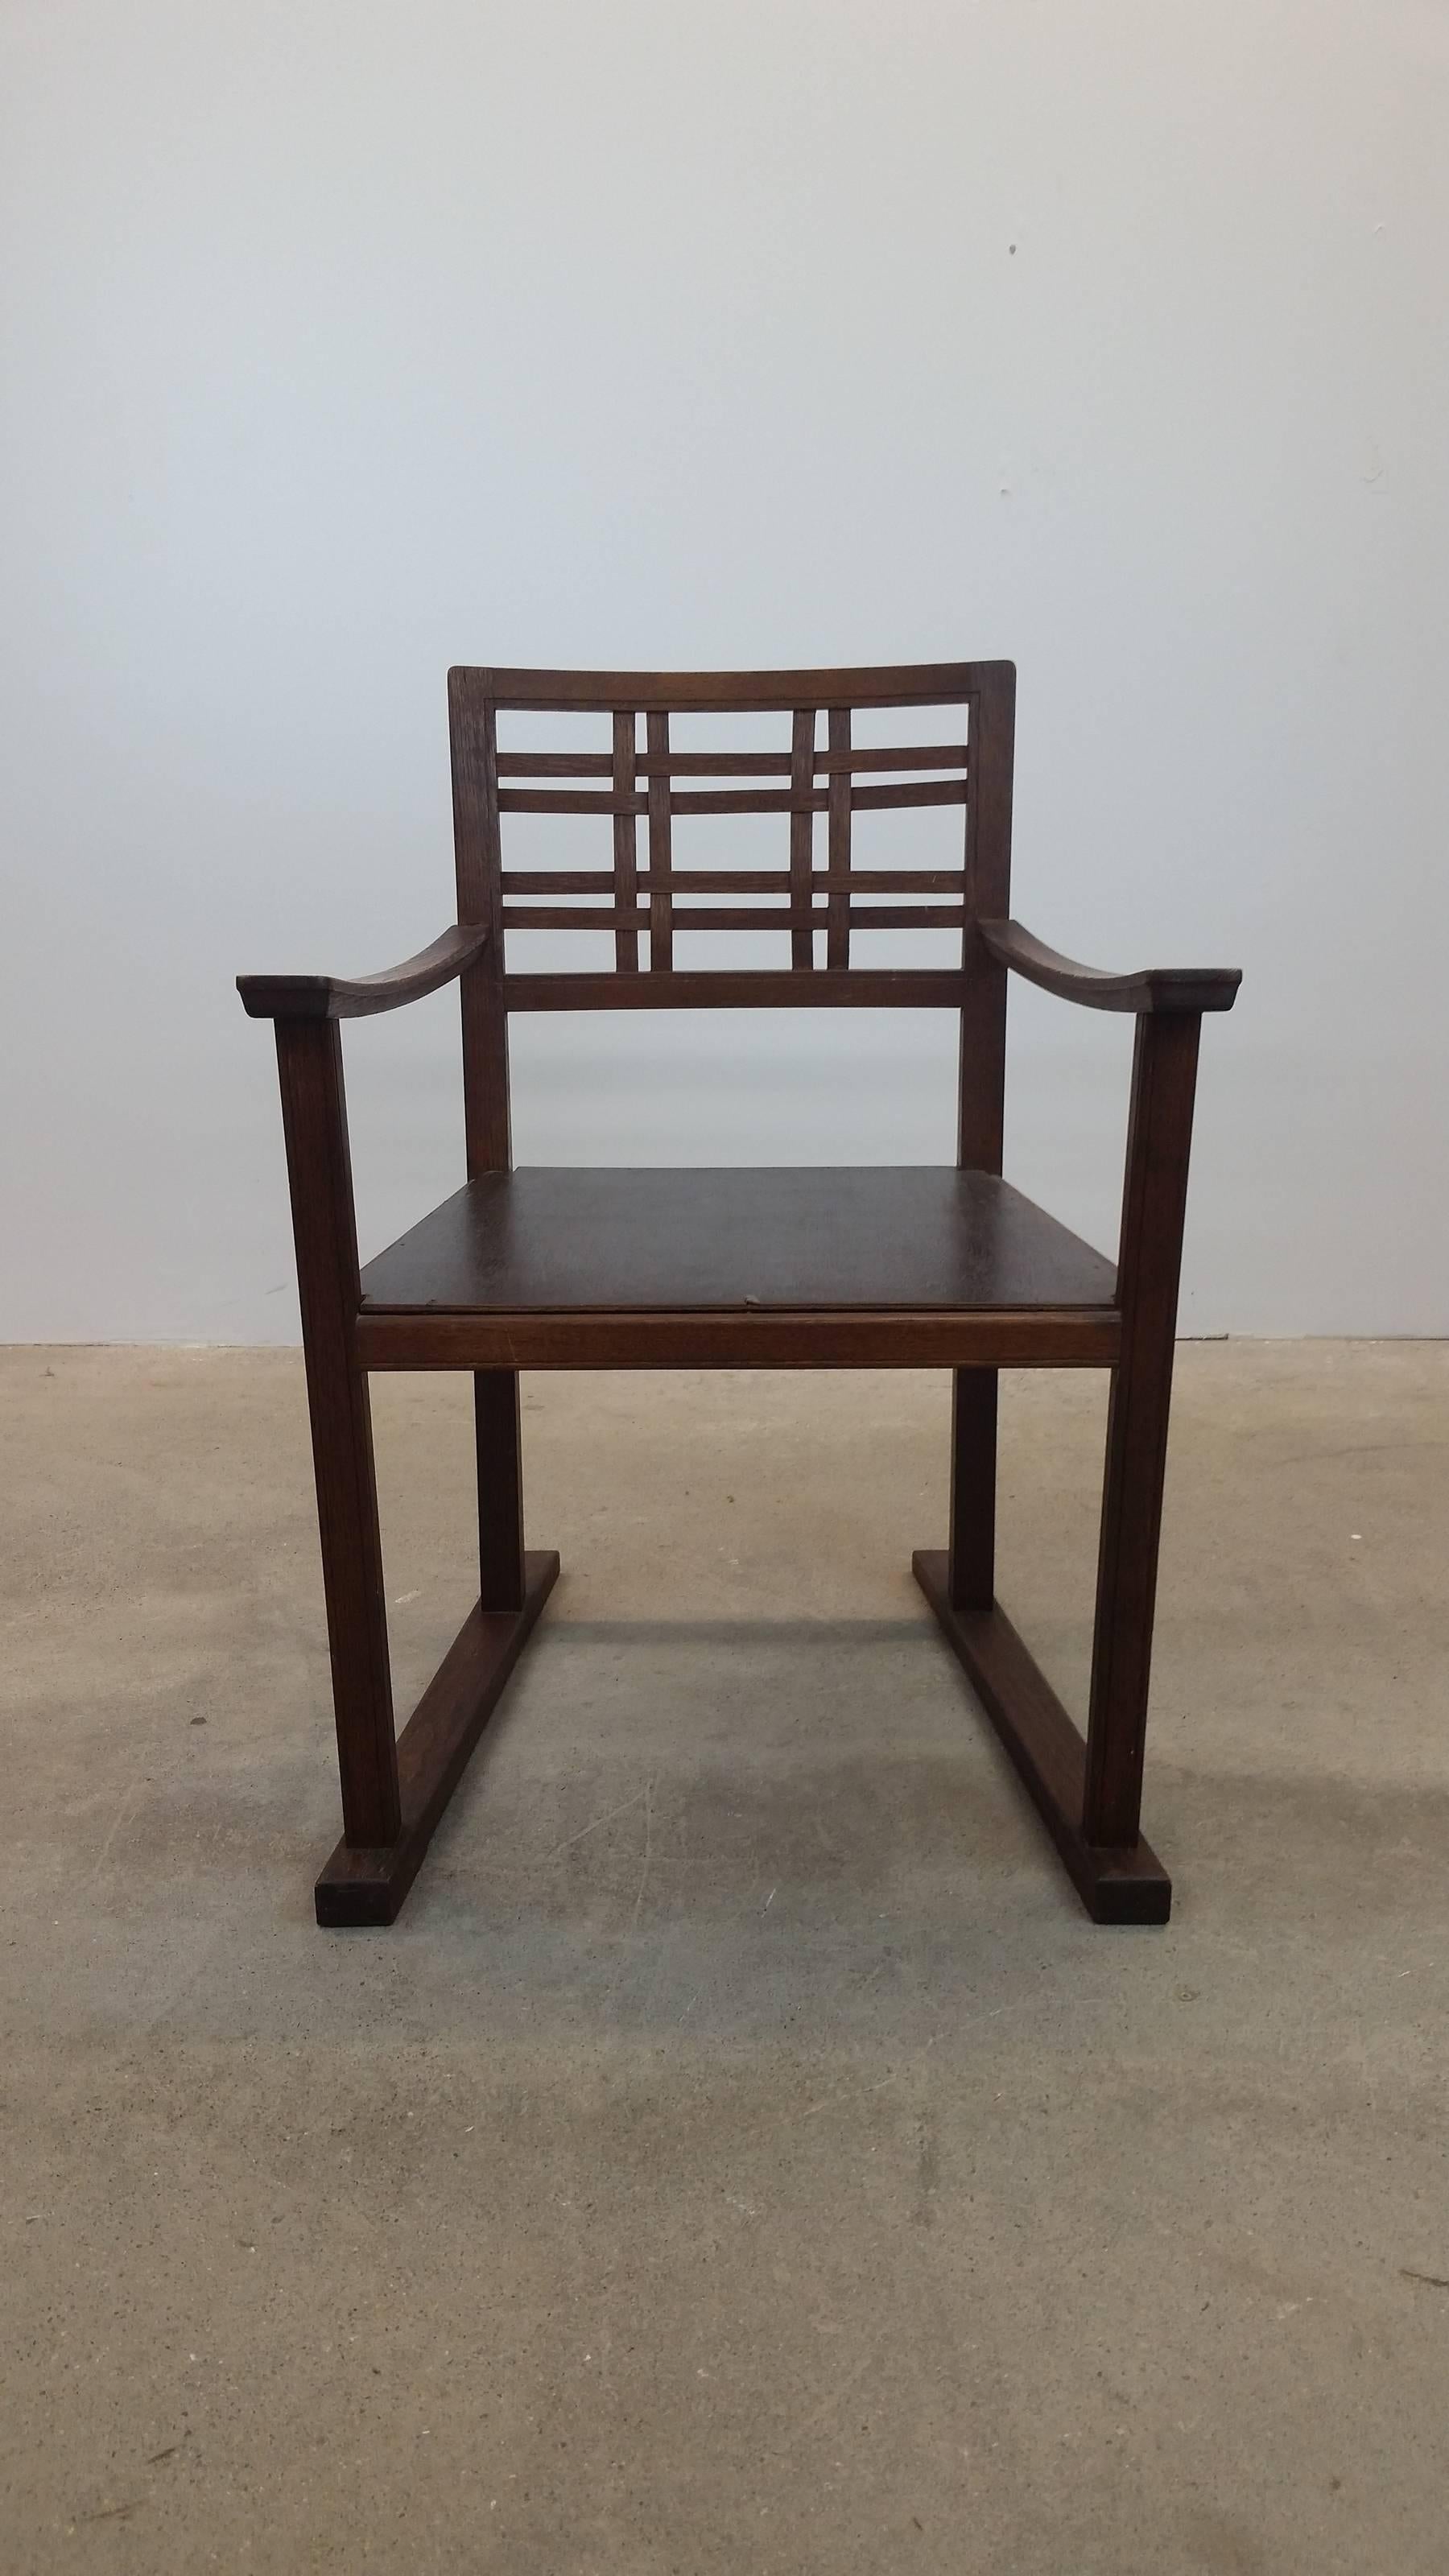 20th Century Scottish Art and Crafts Chair For Sale